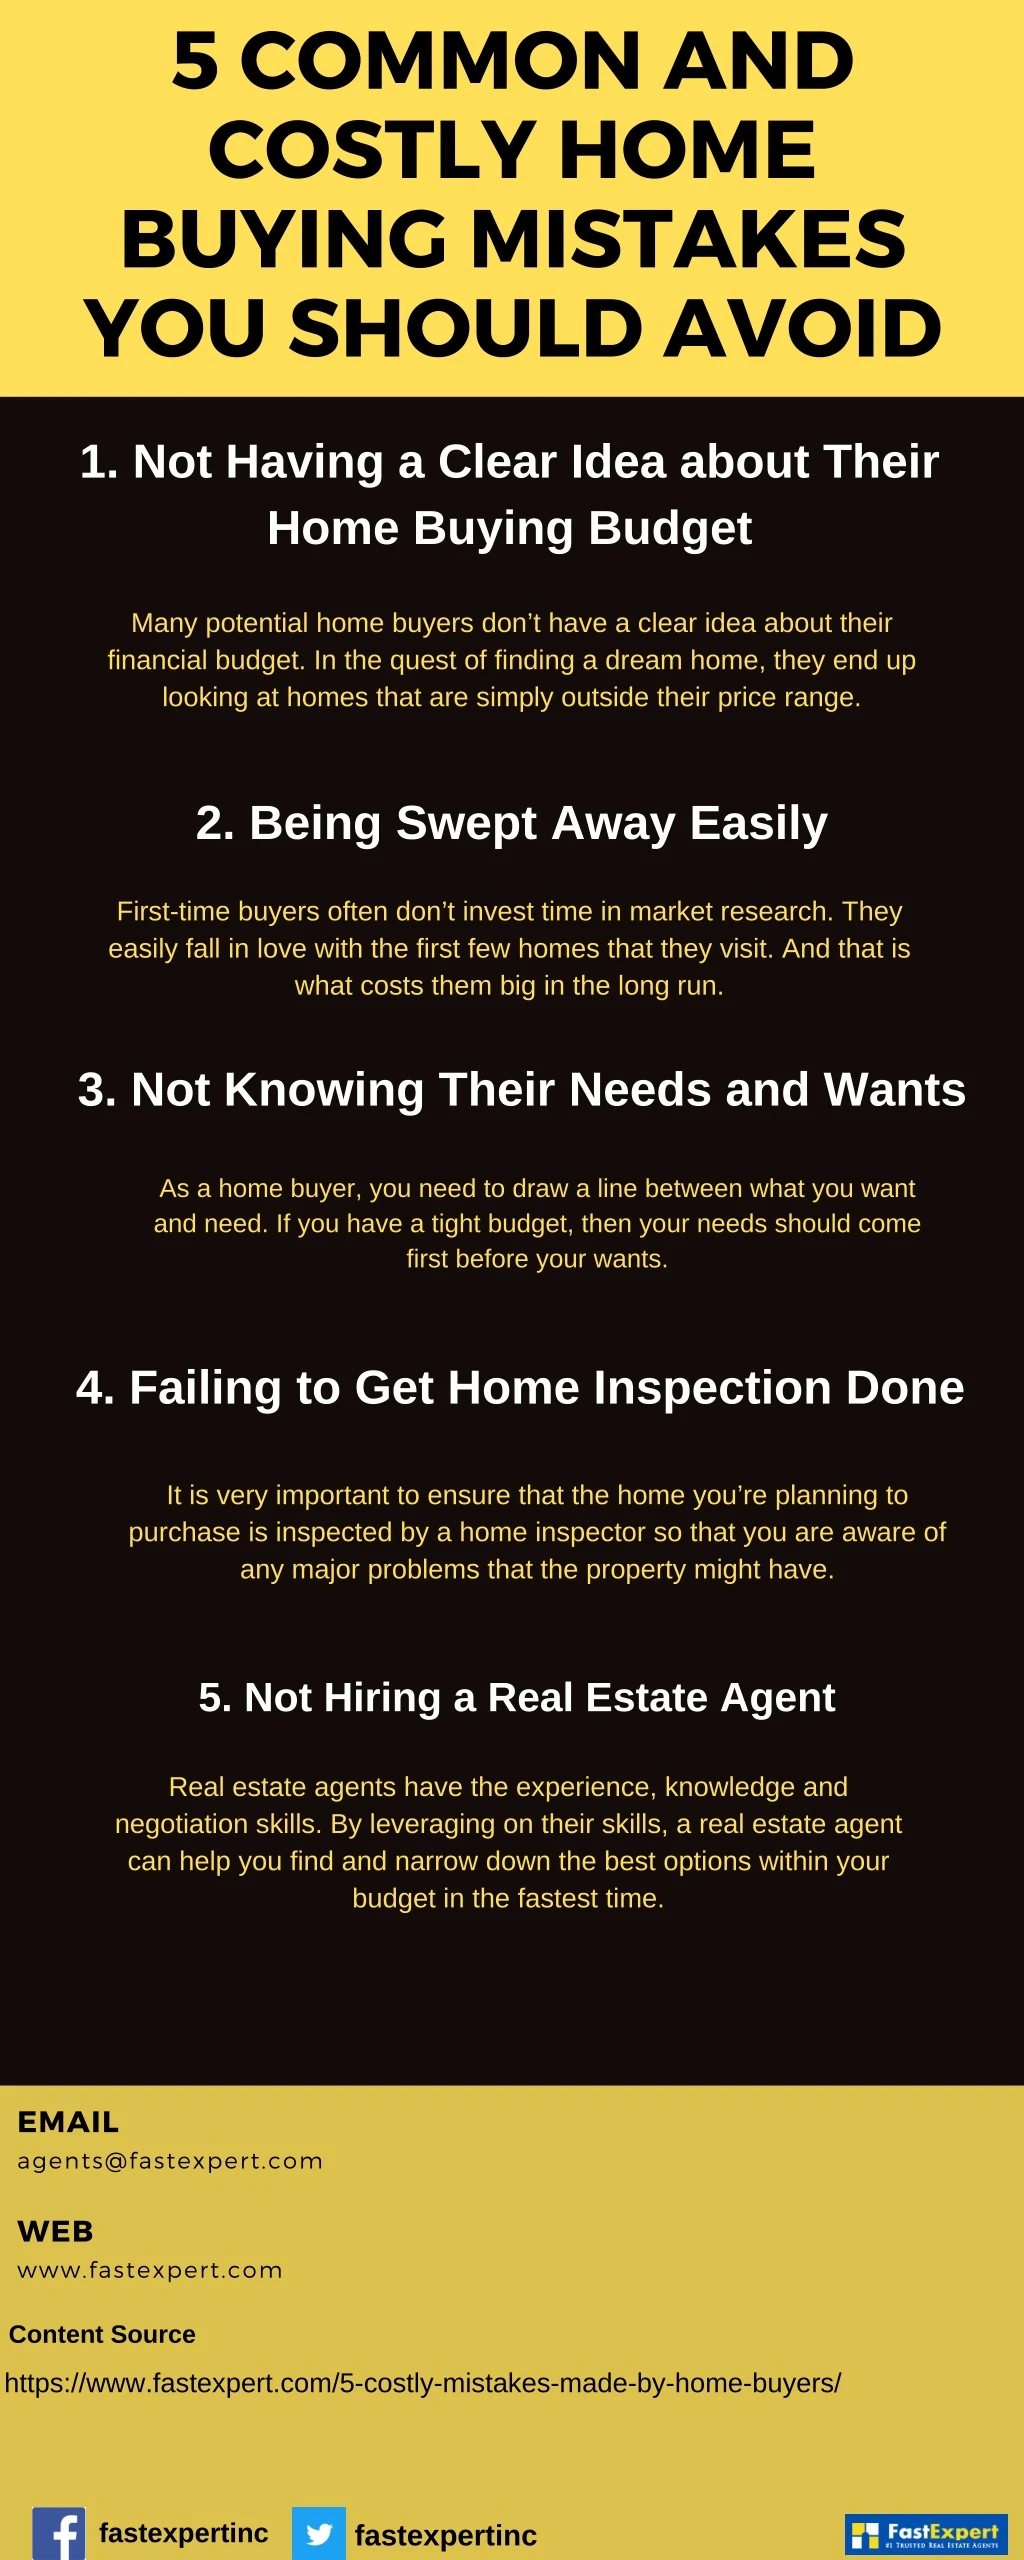 5 common and costly home buying mistakes